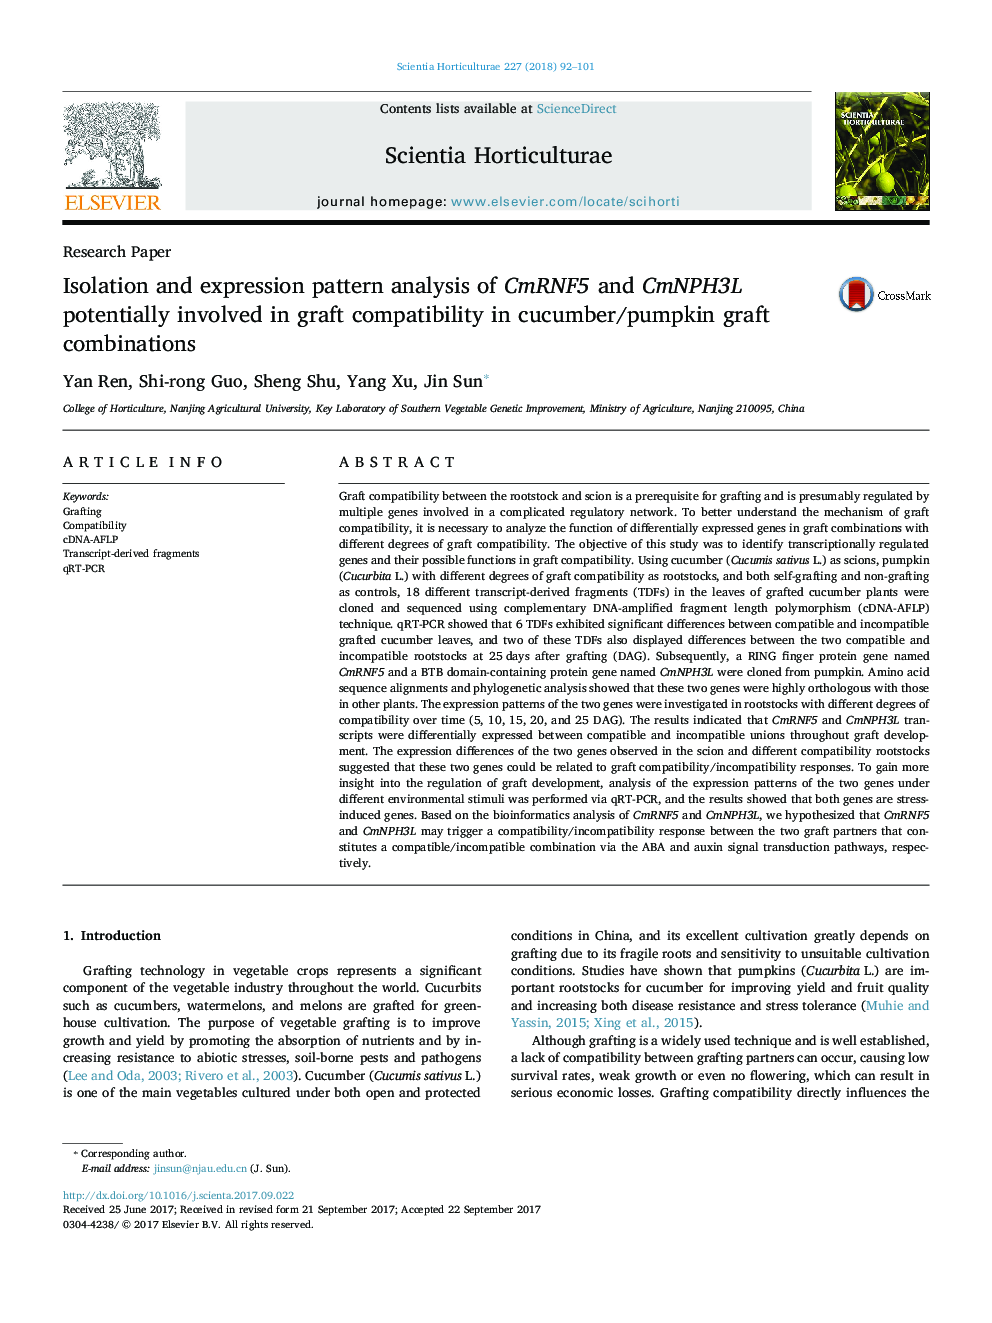 Research PaperIsolation and expression pattern analysis of CmRNF5 and CmNPH3L potentially involved in graft compatibility in cucumber/pumpkin graft combinations